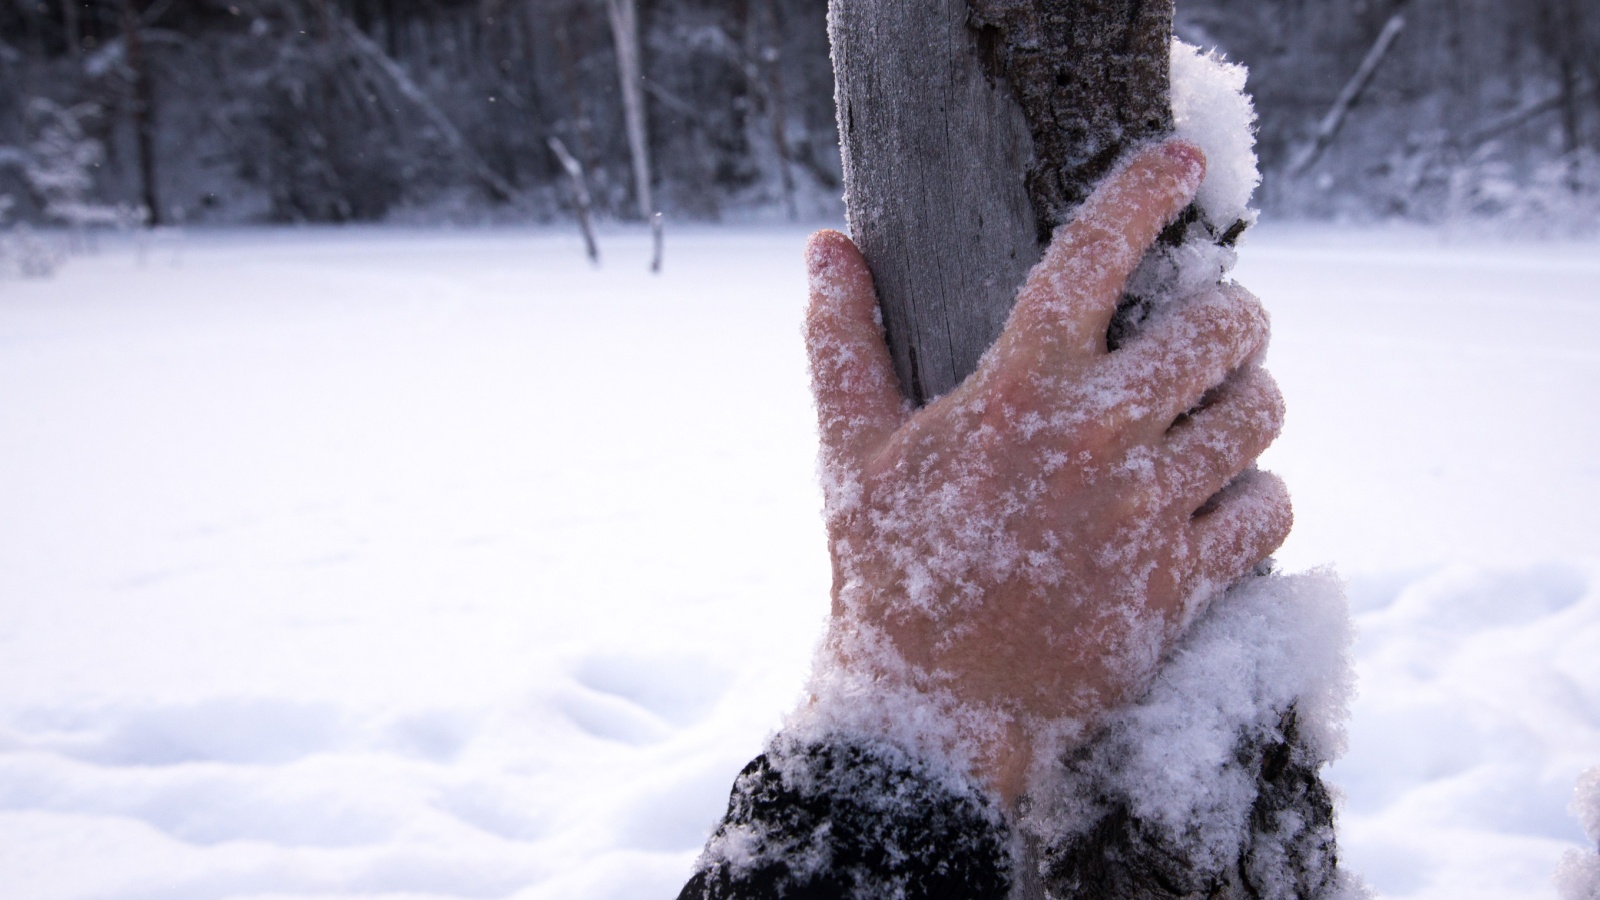 frostbite hands holding a tree in the snow